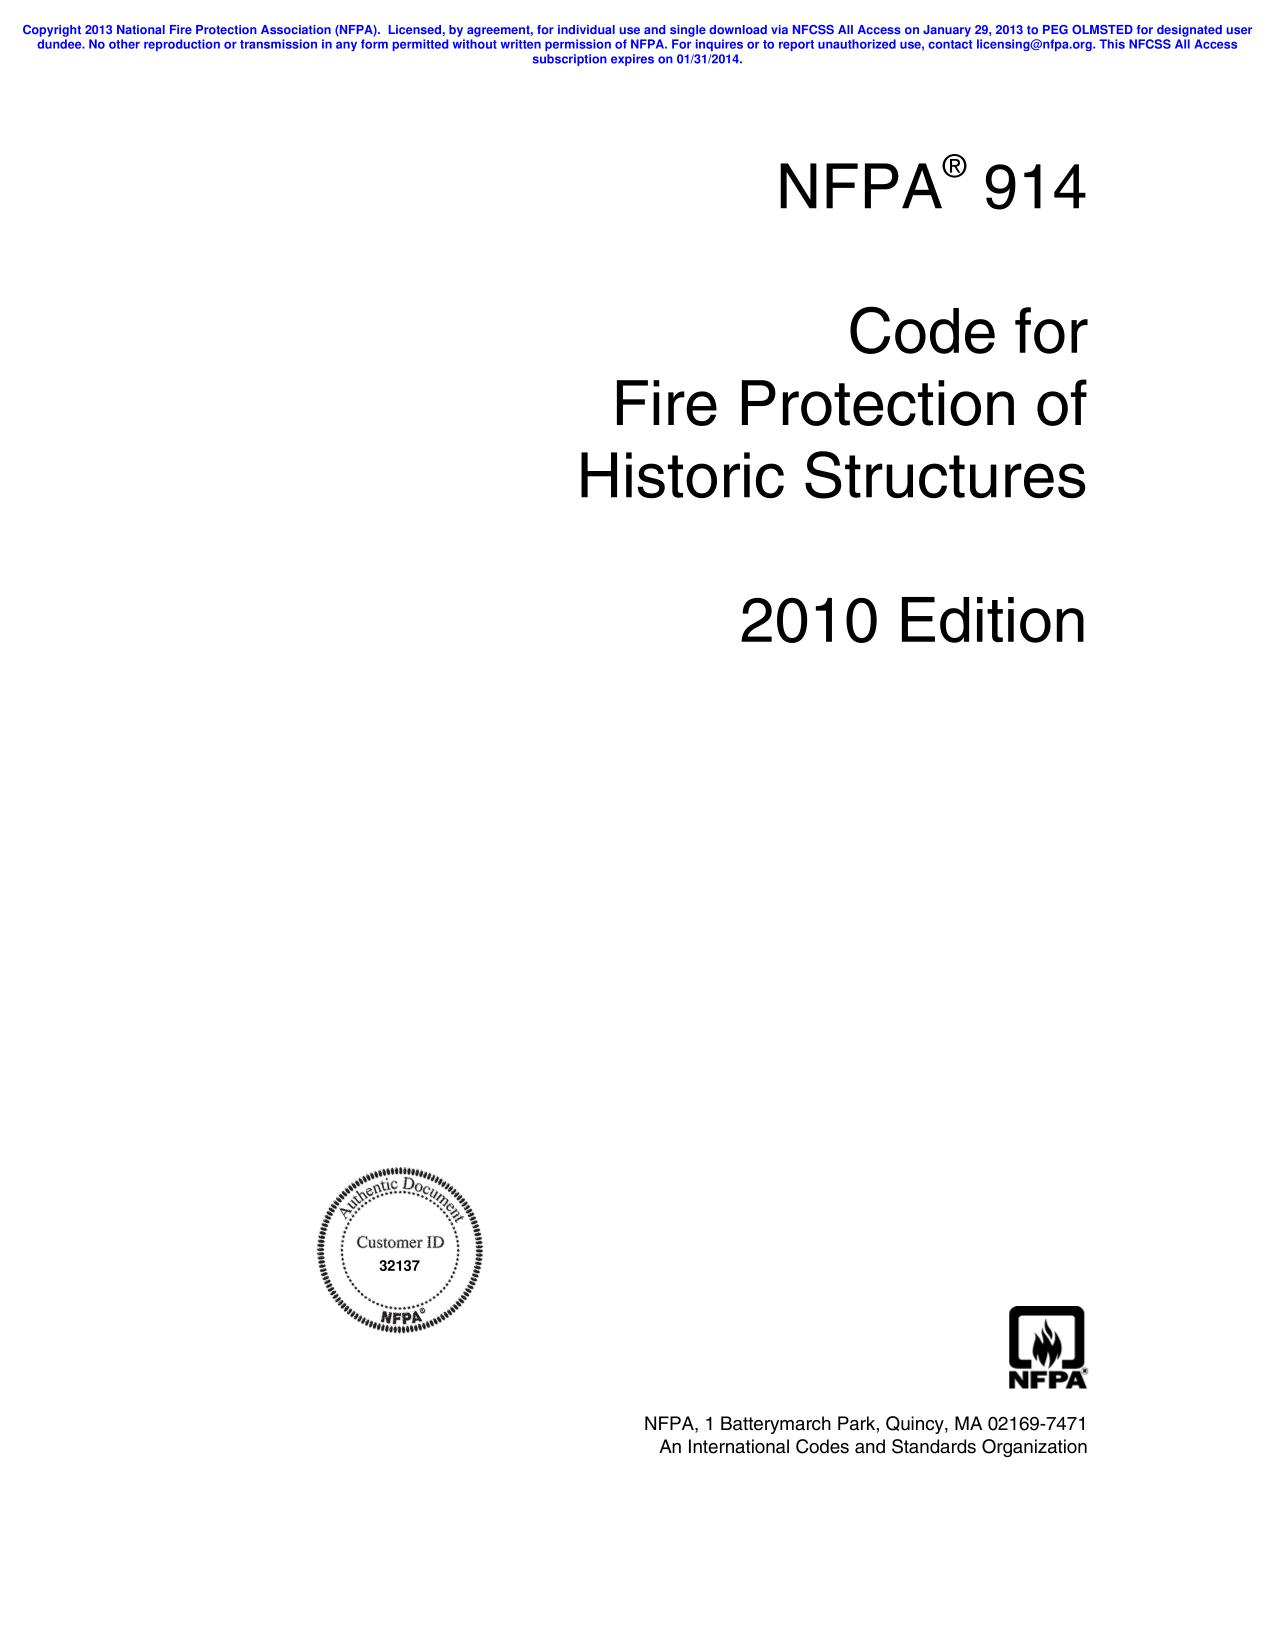 Code for Fire Protection of Historic Structures